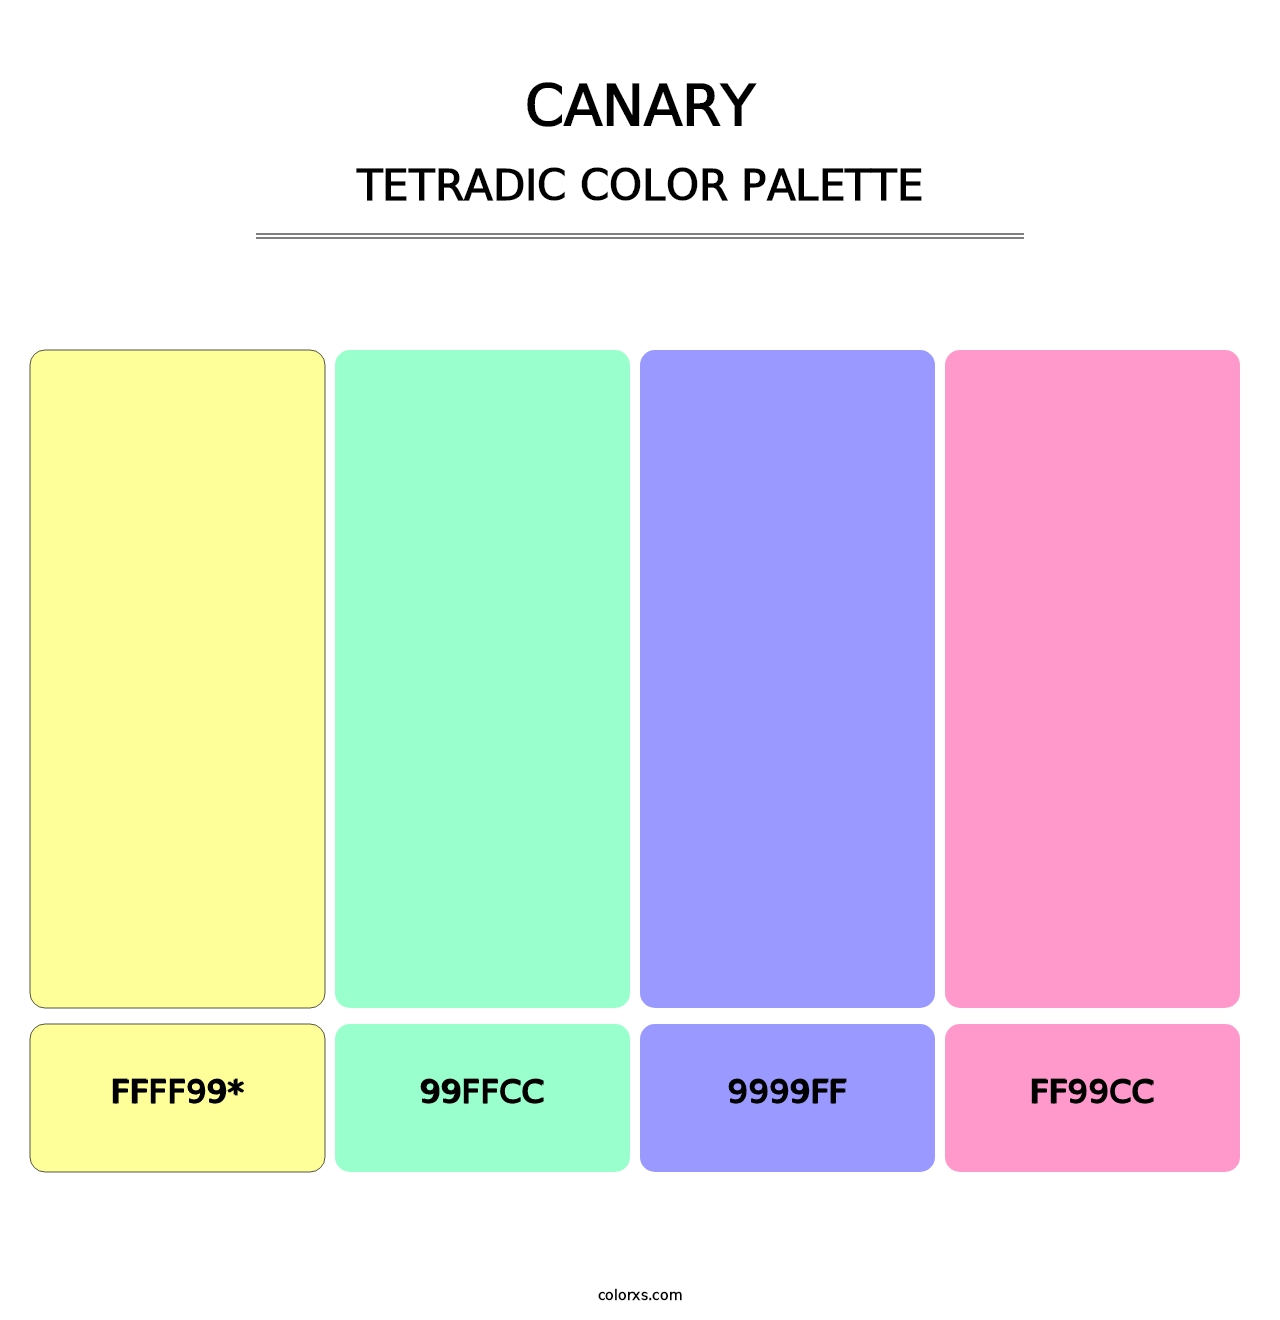 Canary - Tetradic Color Palette